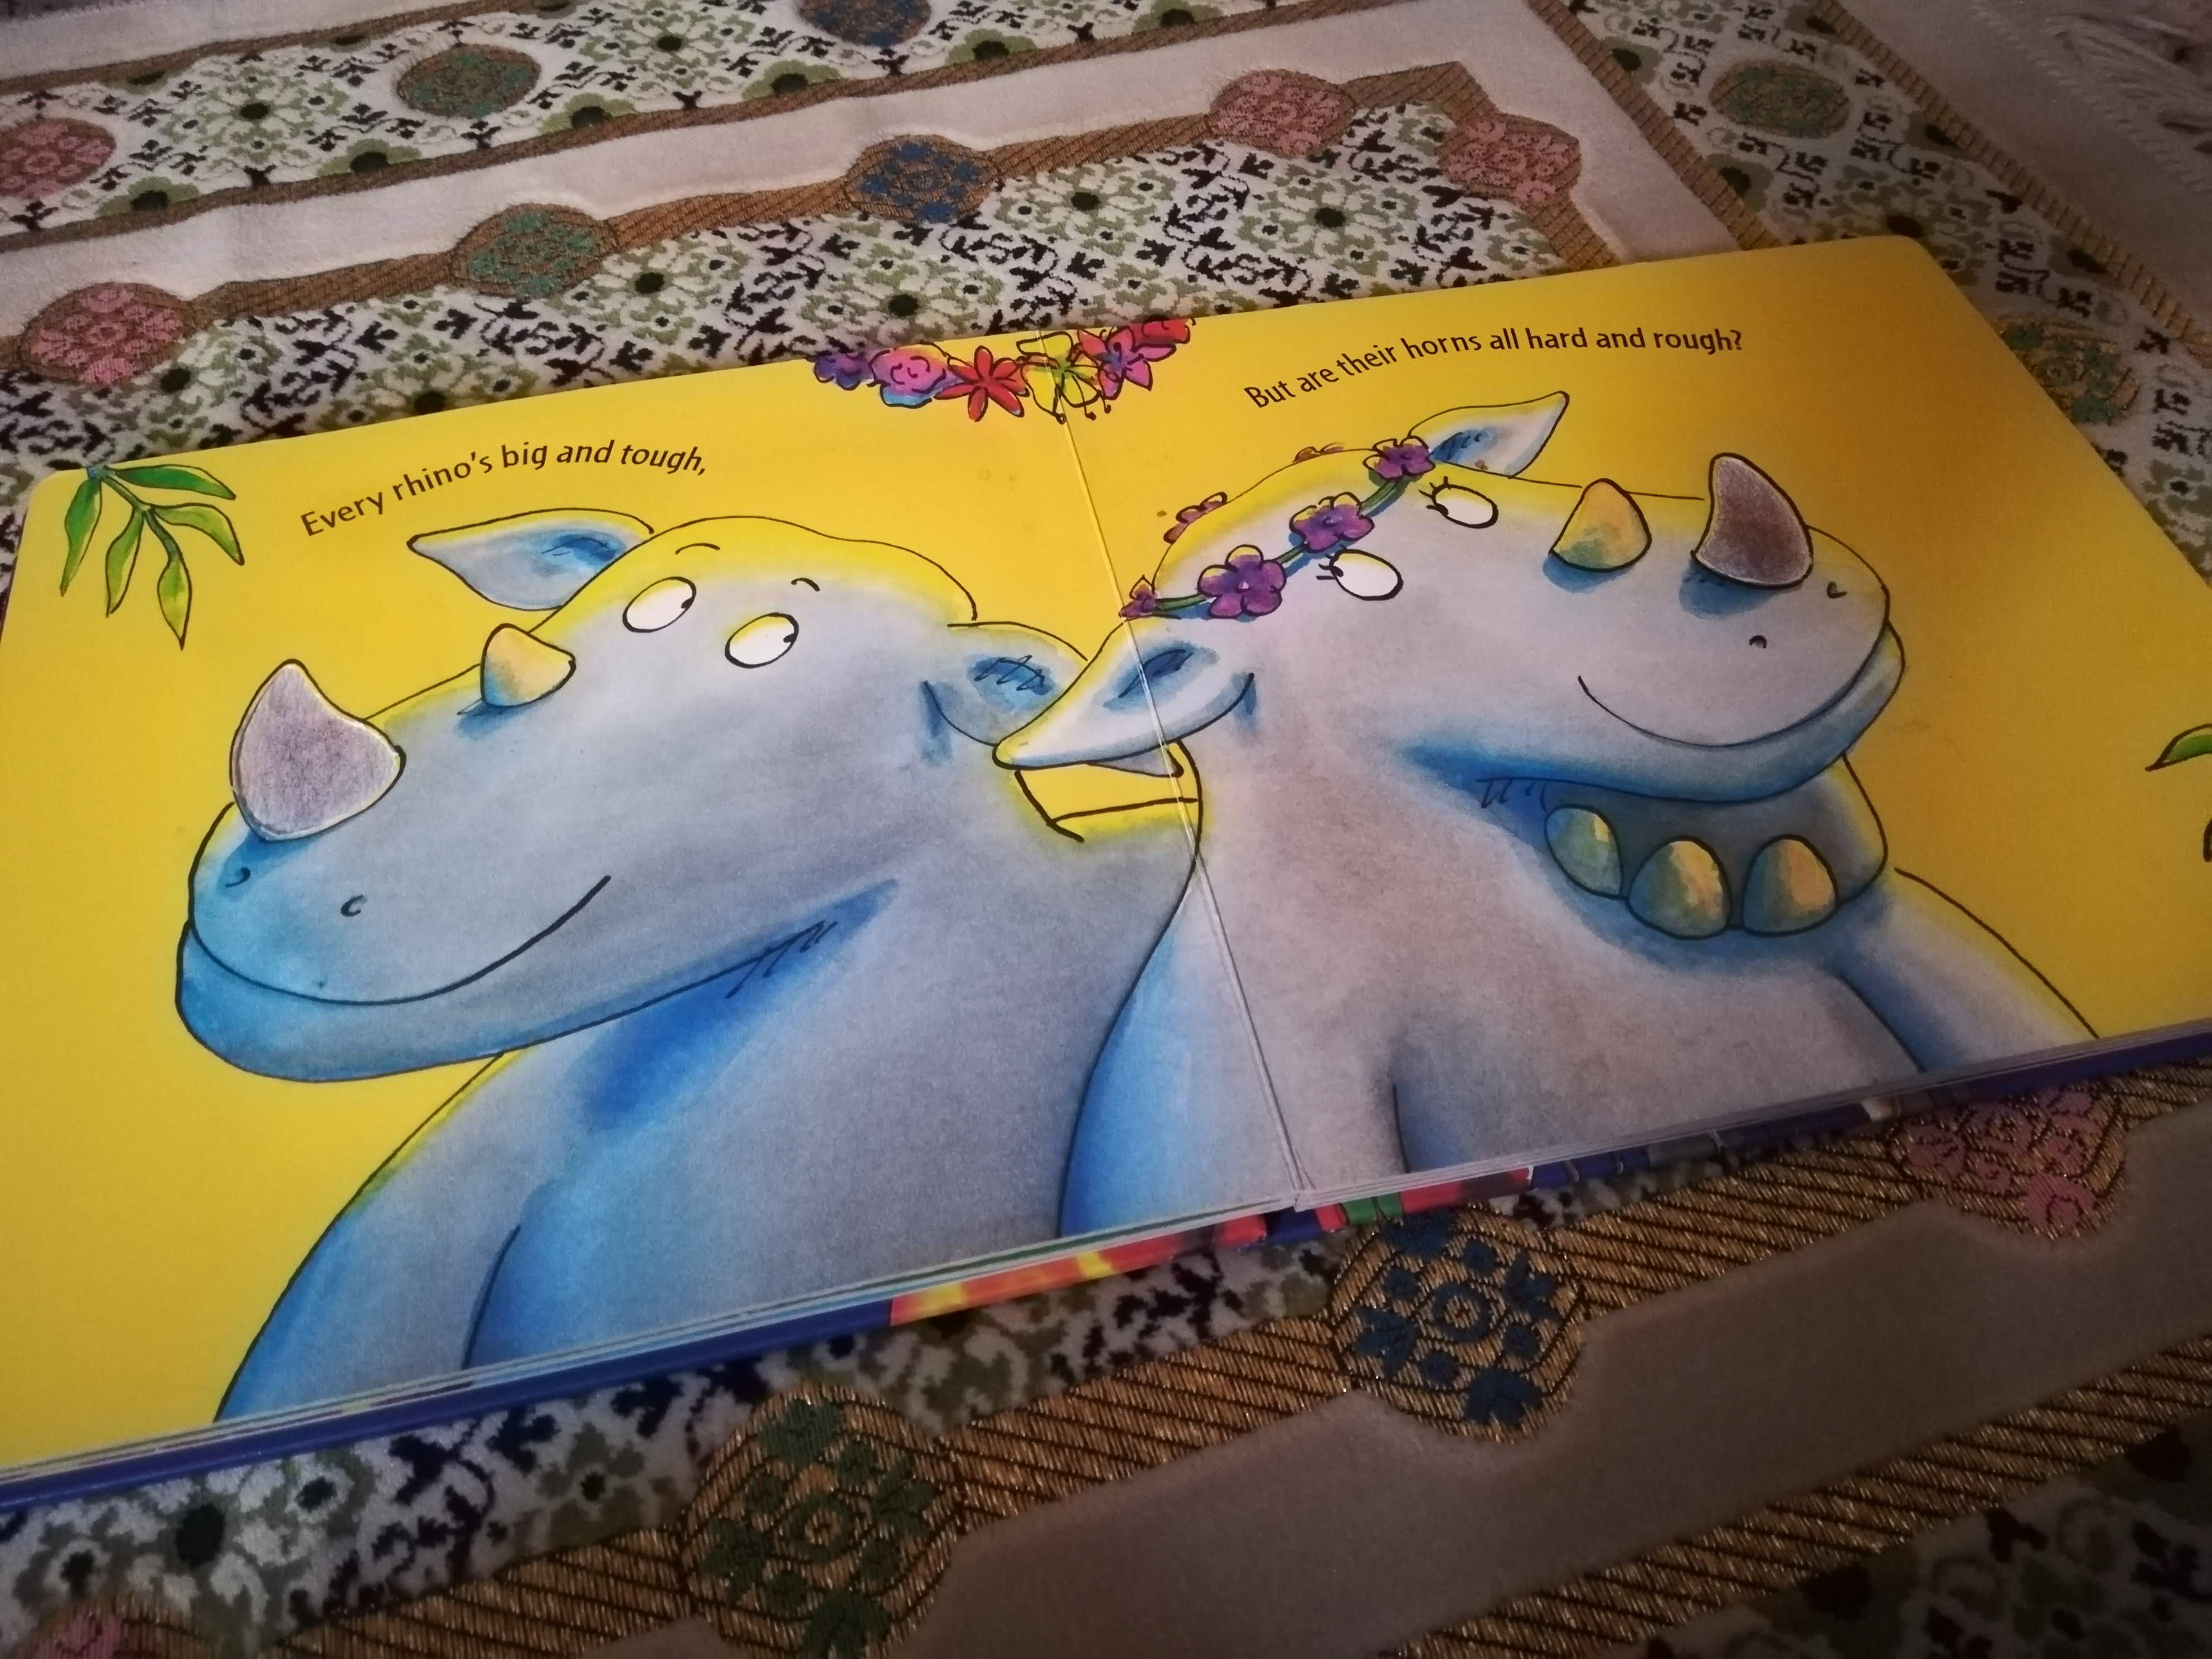 The twins just loved this book before bedtime